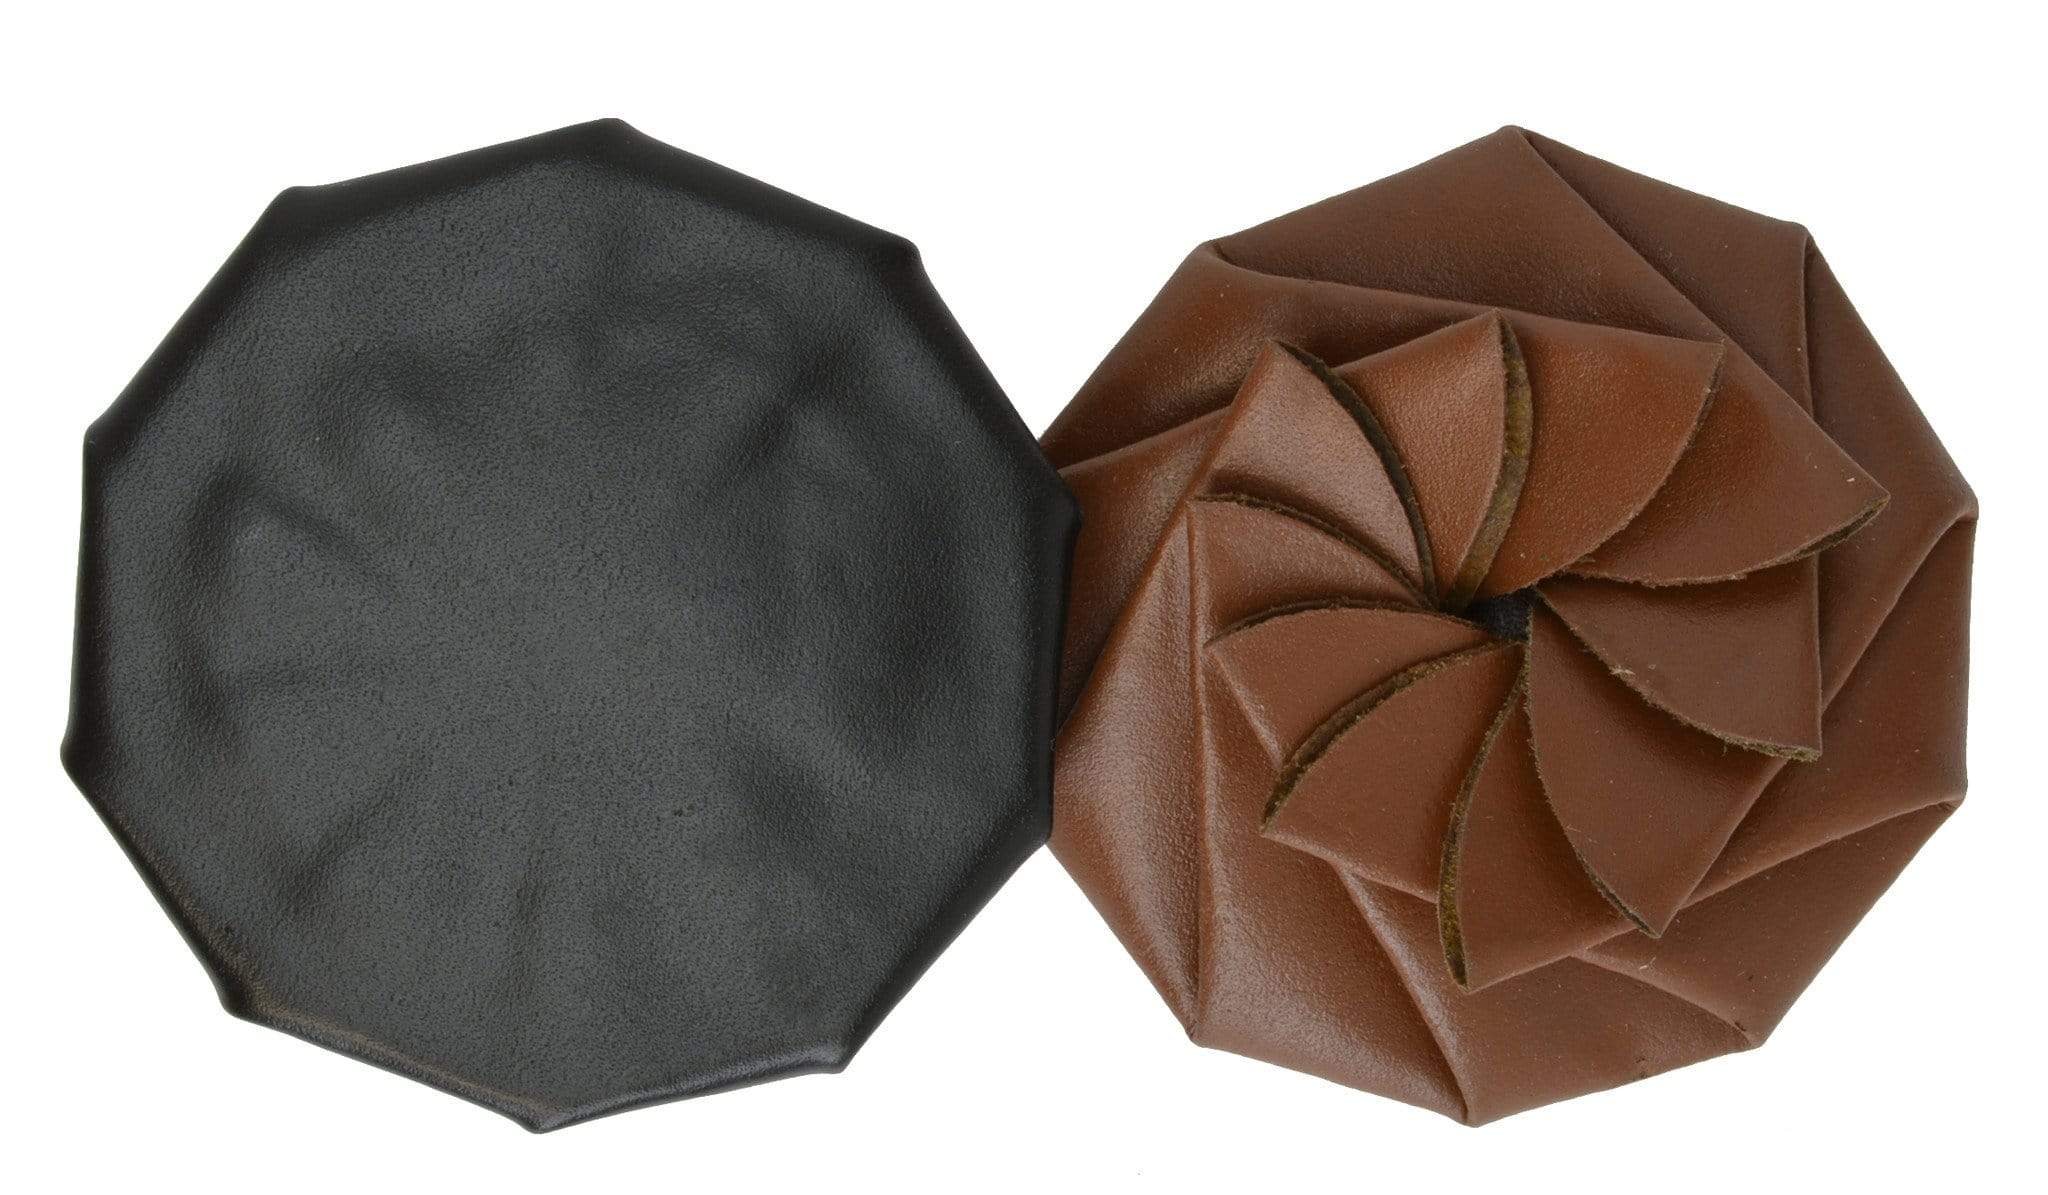 Origami Coin Purse Slims Your Pocket :: Behance